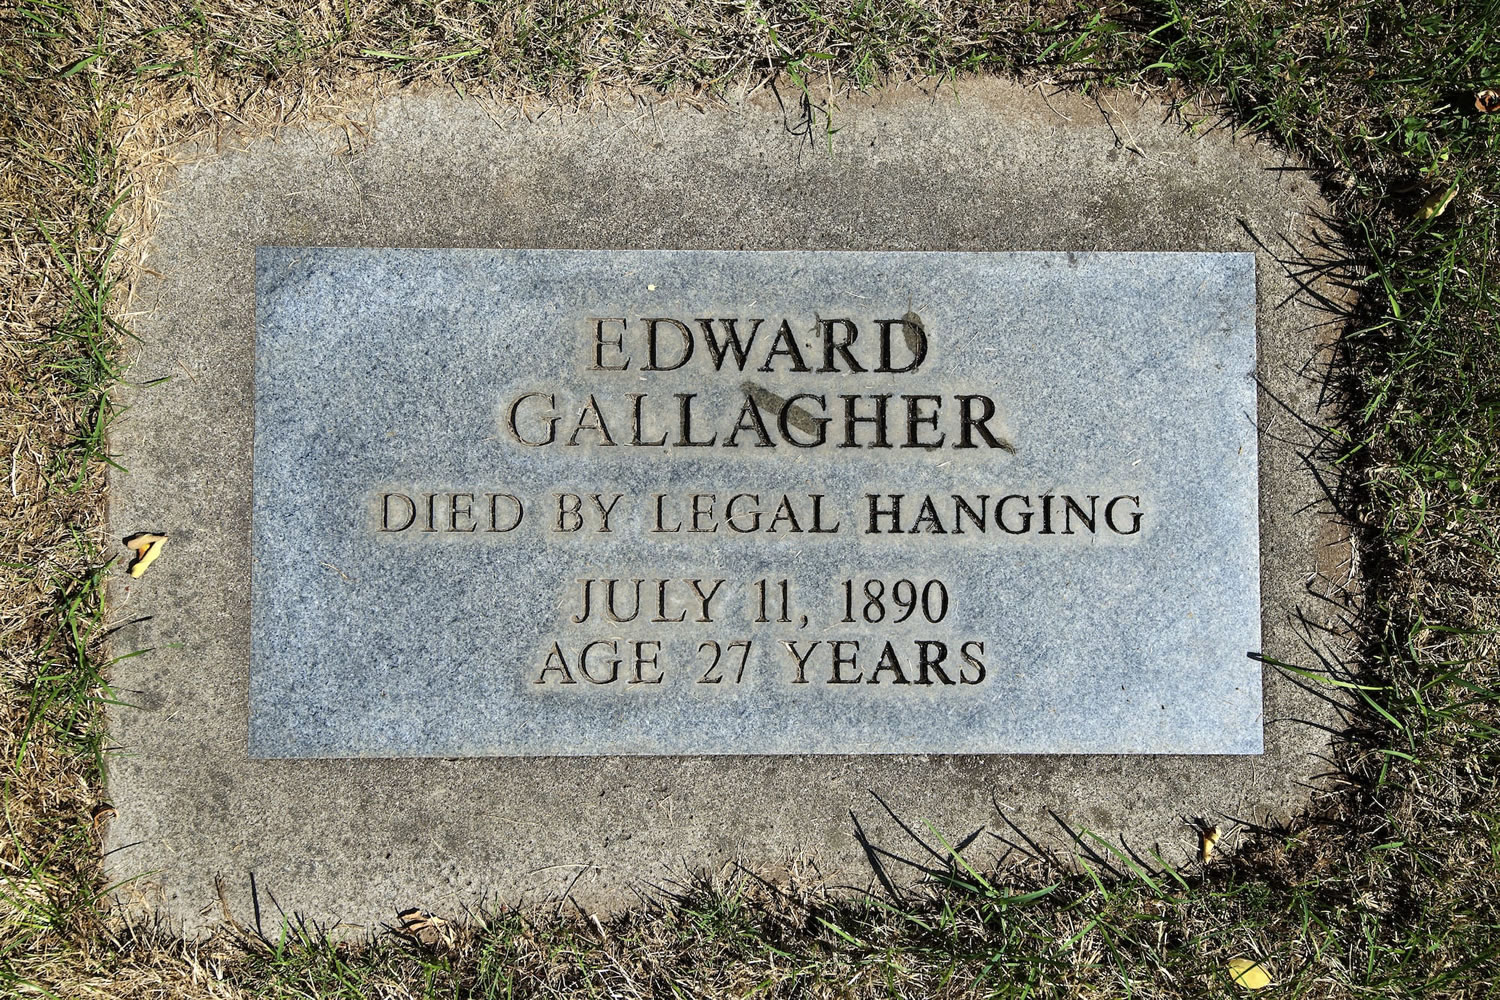 Edward Gallagher, the only person to be legally hanged in Clark County, is buried in the potter's field section of the Old City Cemetery in Vancouver.